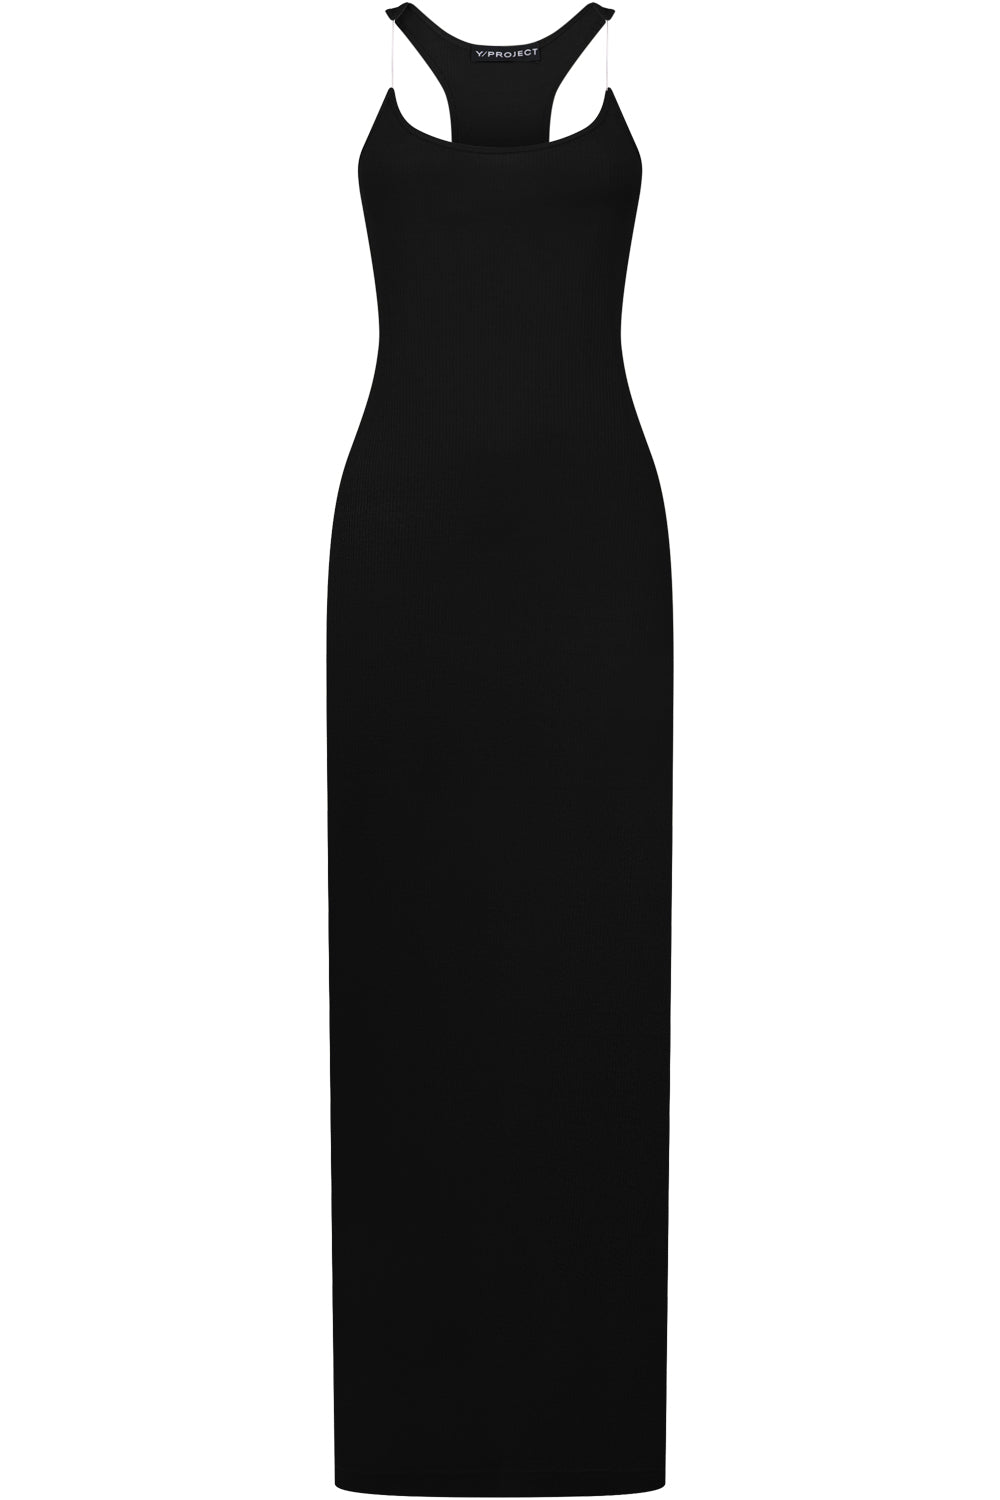 Y/PROJECT RTW INVISIBLE STRAP DRESS | BLACK